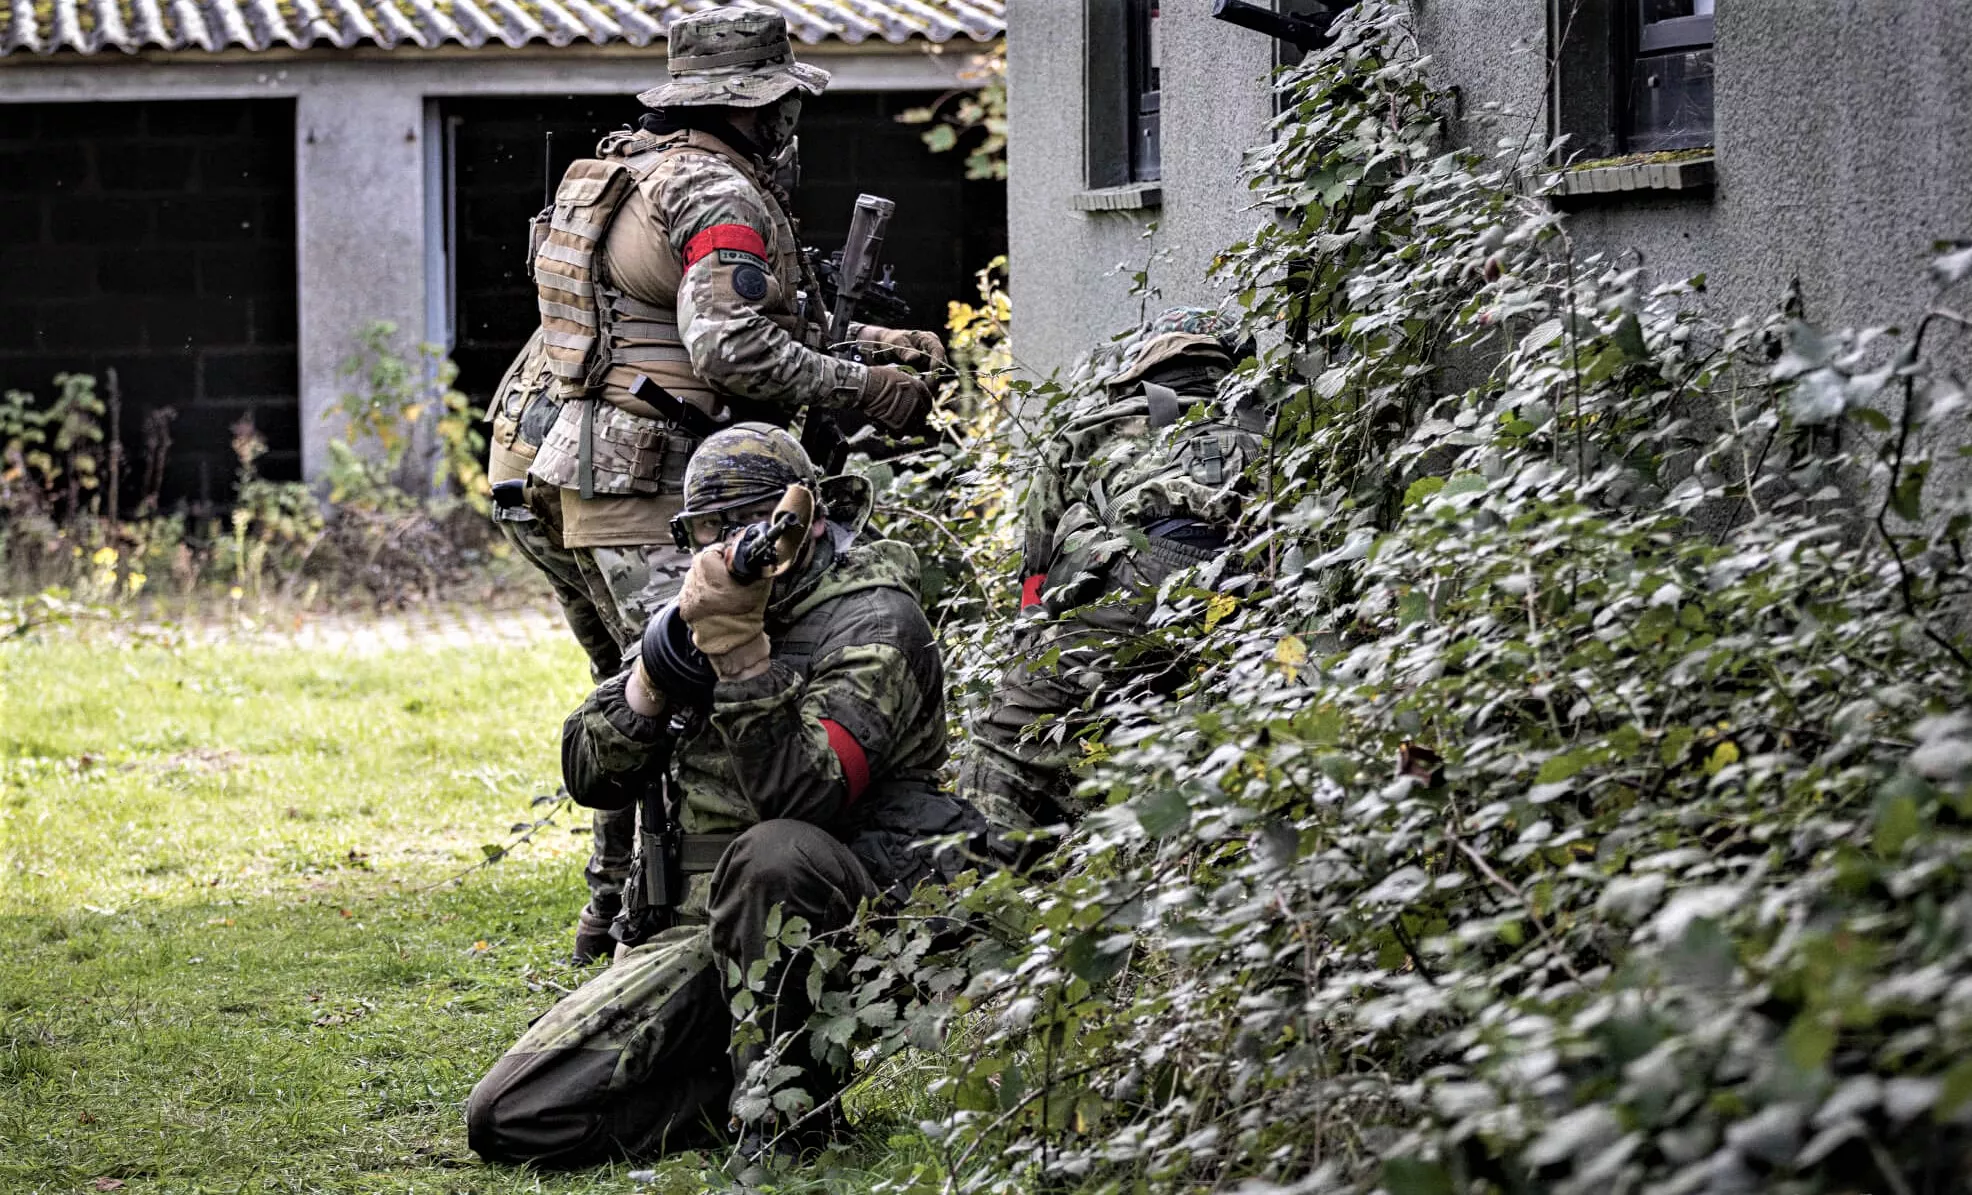 Airsoft Arena The Front Line in Germany, Europe | Airsoft - Rated 9.5